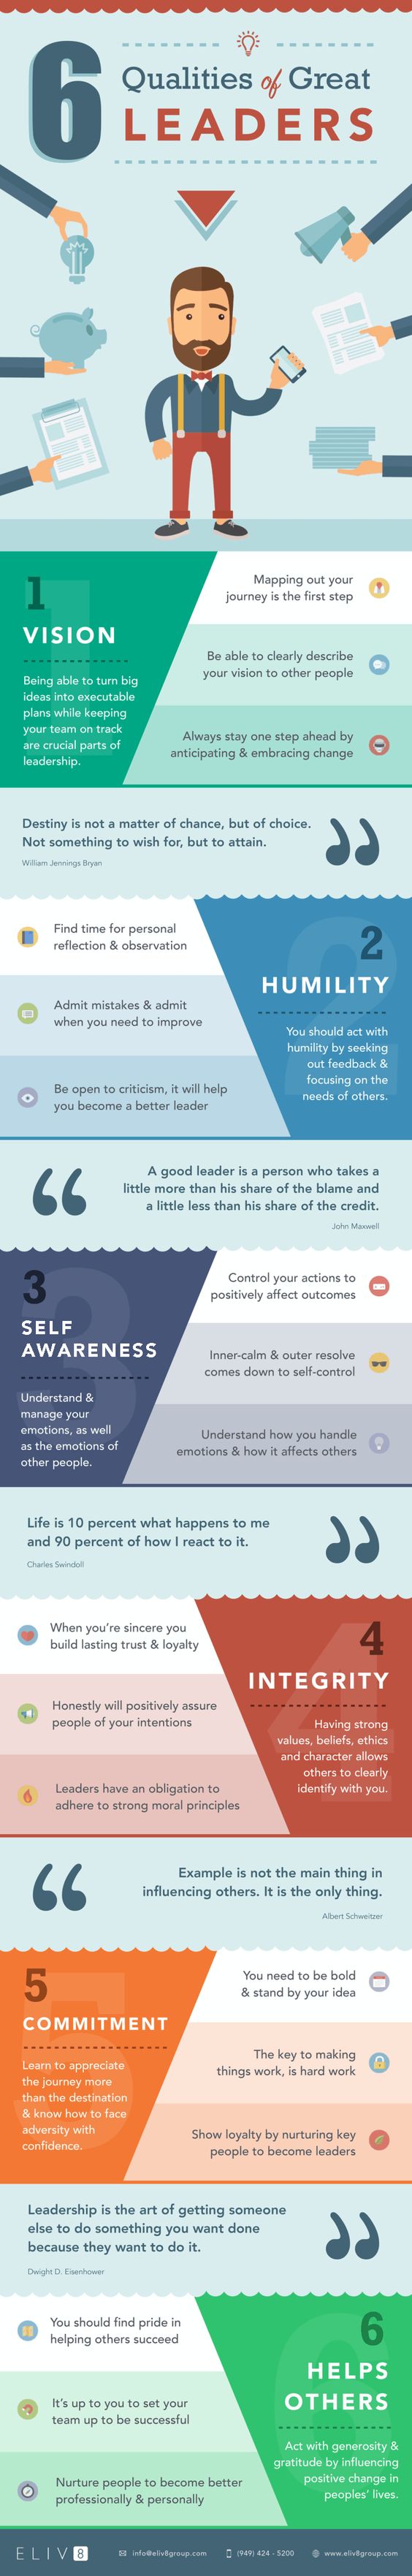 6 qualities of great leaders infographic statistics